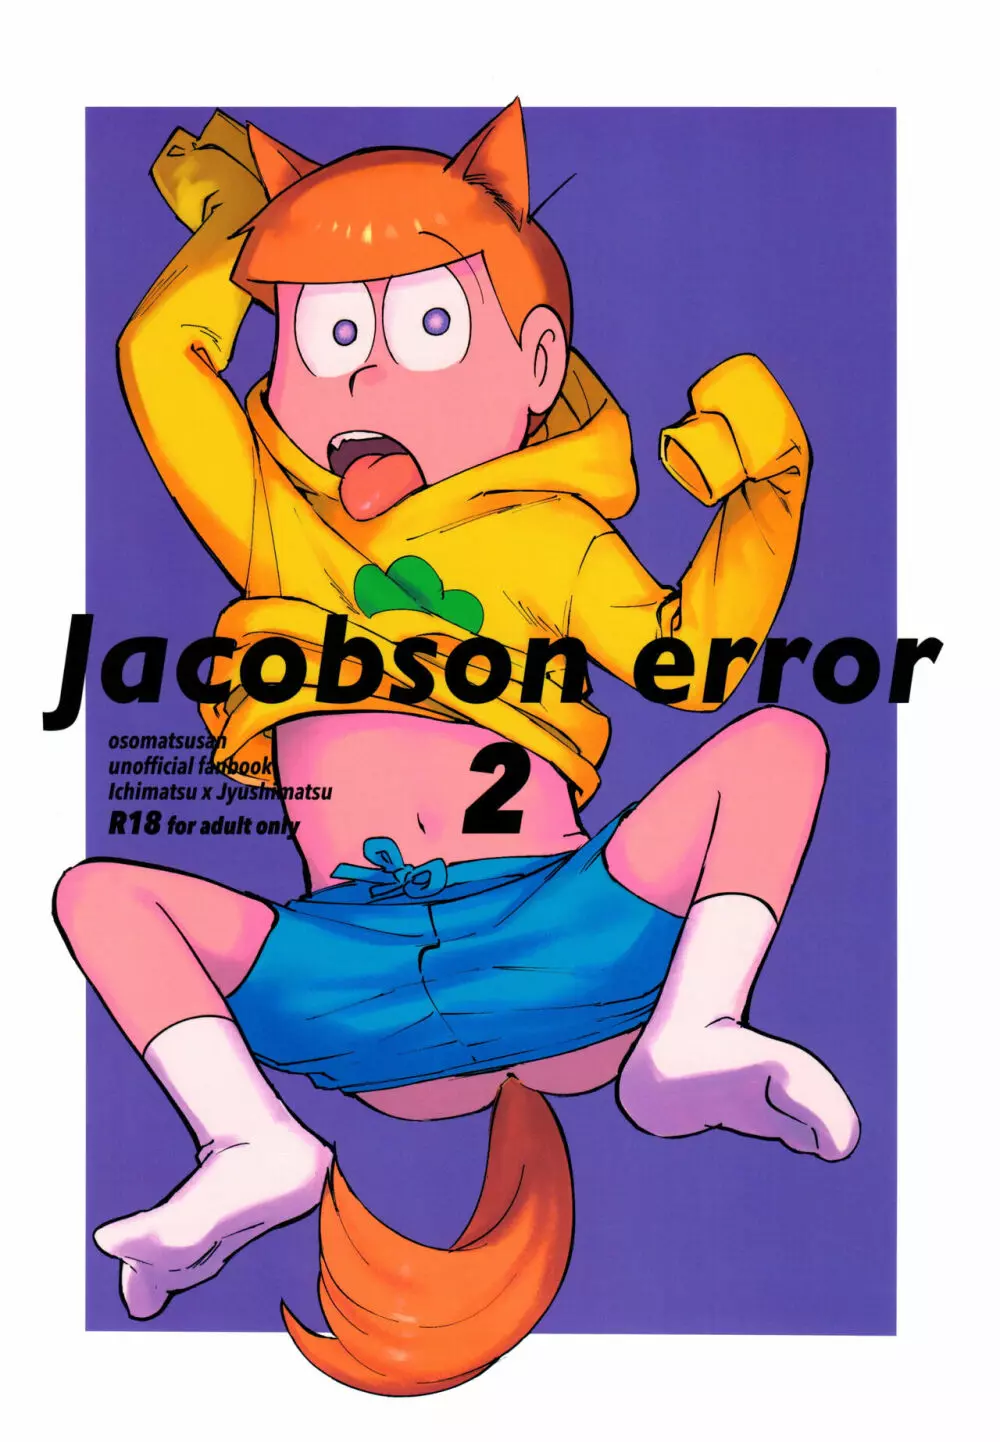 jacobson error2 Page.1